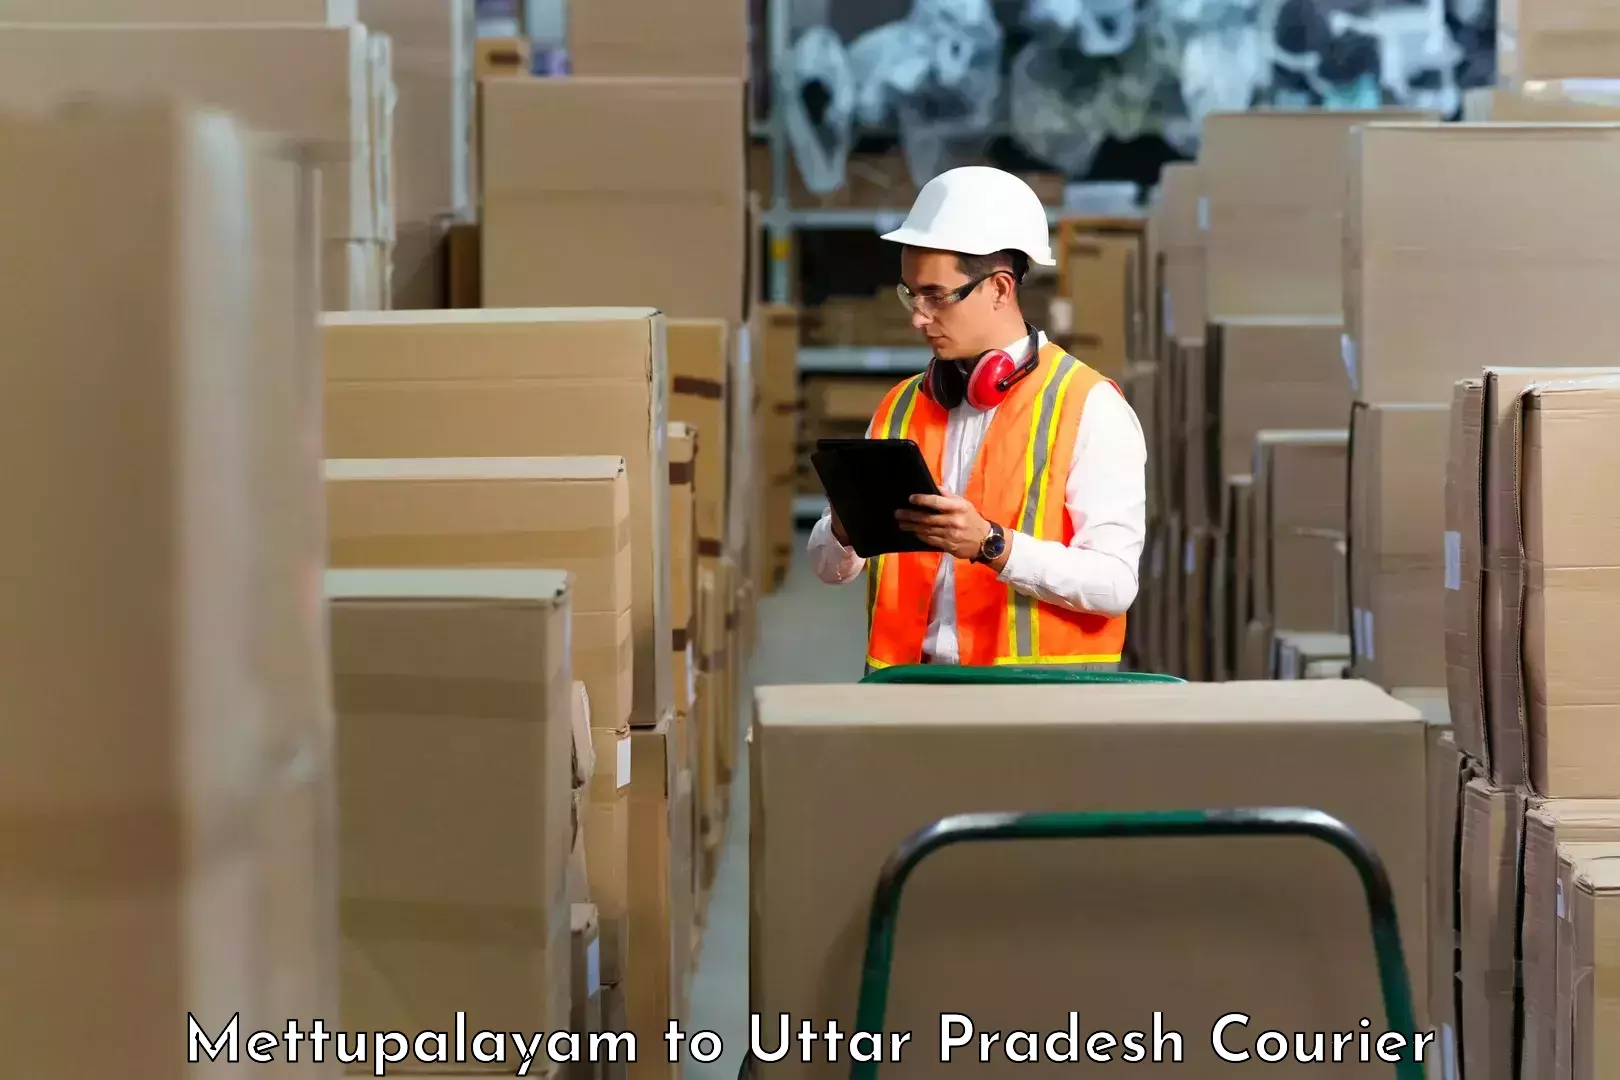 Full-service courier options Mettupalayam to Utraula